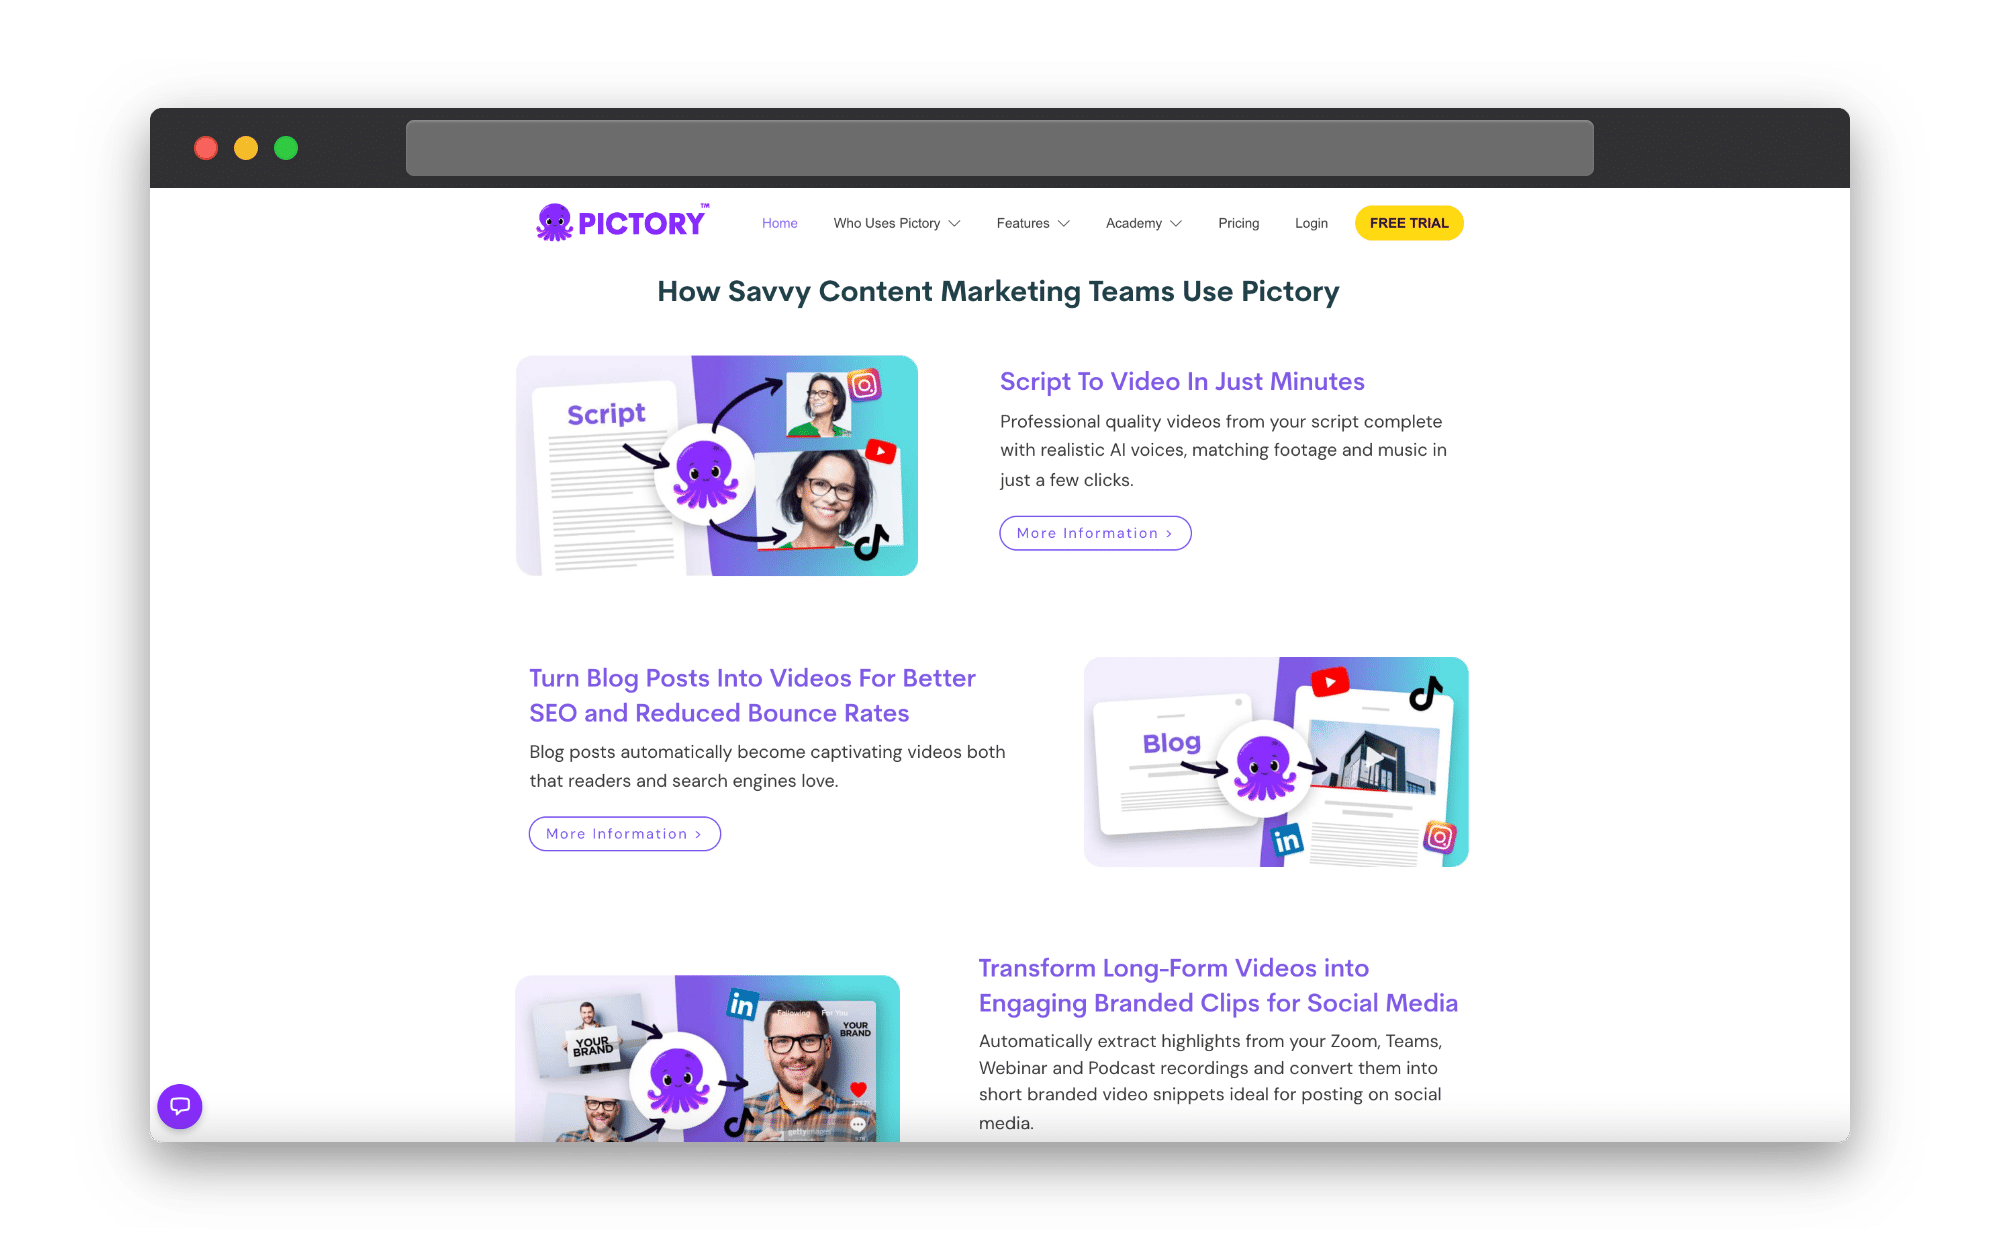 When it's time to build your video content marketing strategy, Pictory is the online video editor you need in your arsenal.